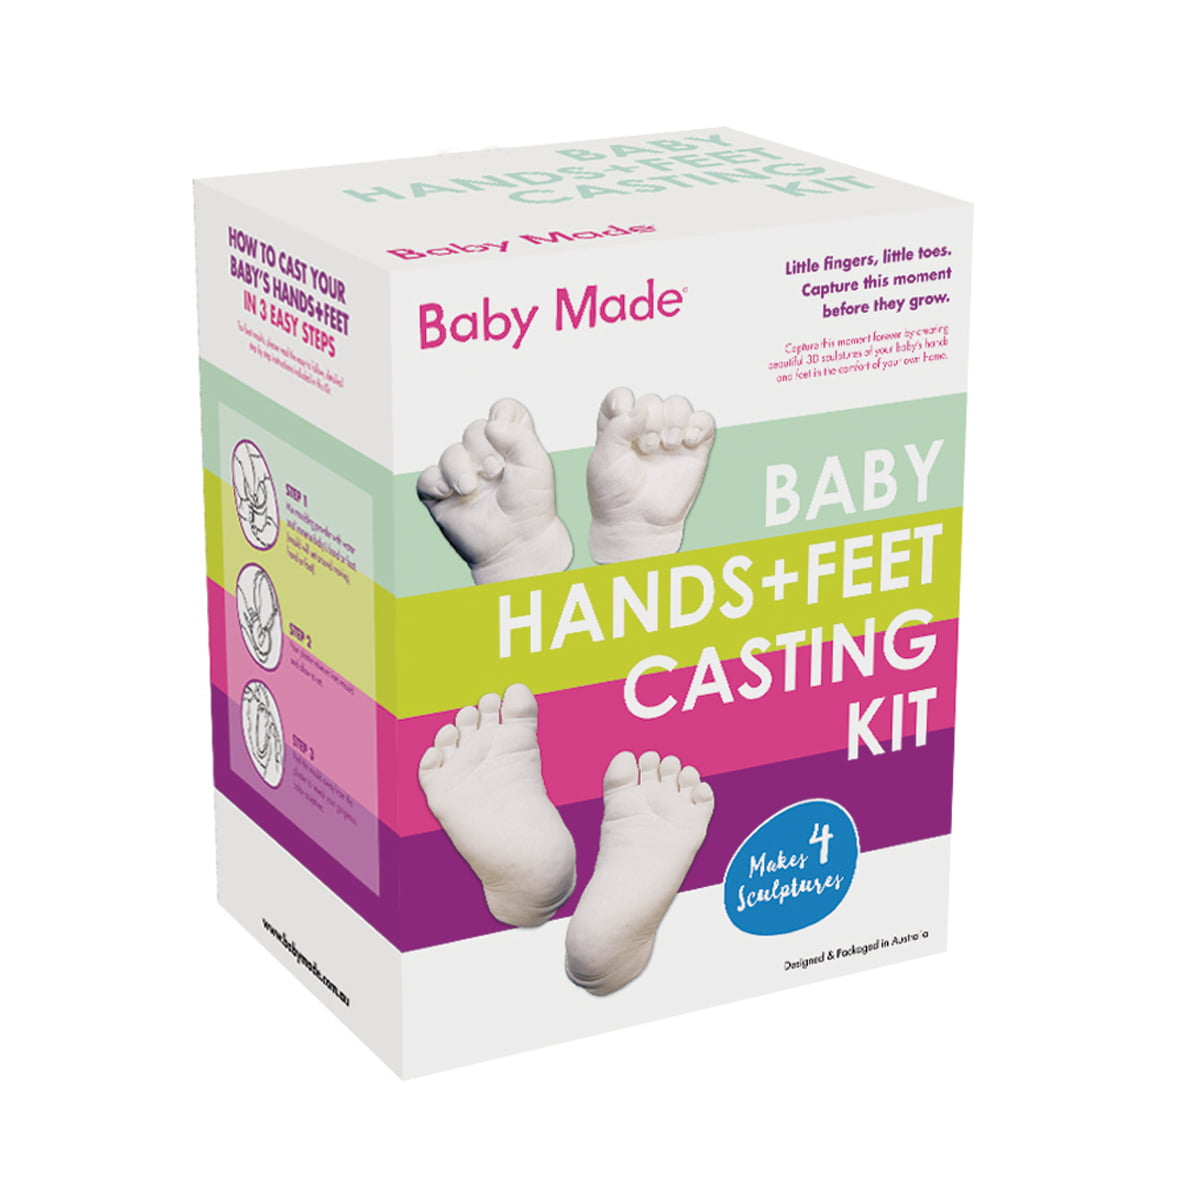 Capture Precious Moments Of your Little One With The Best Quality Hand Cast Kit